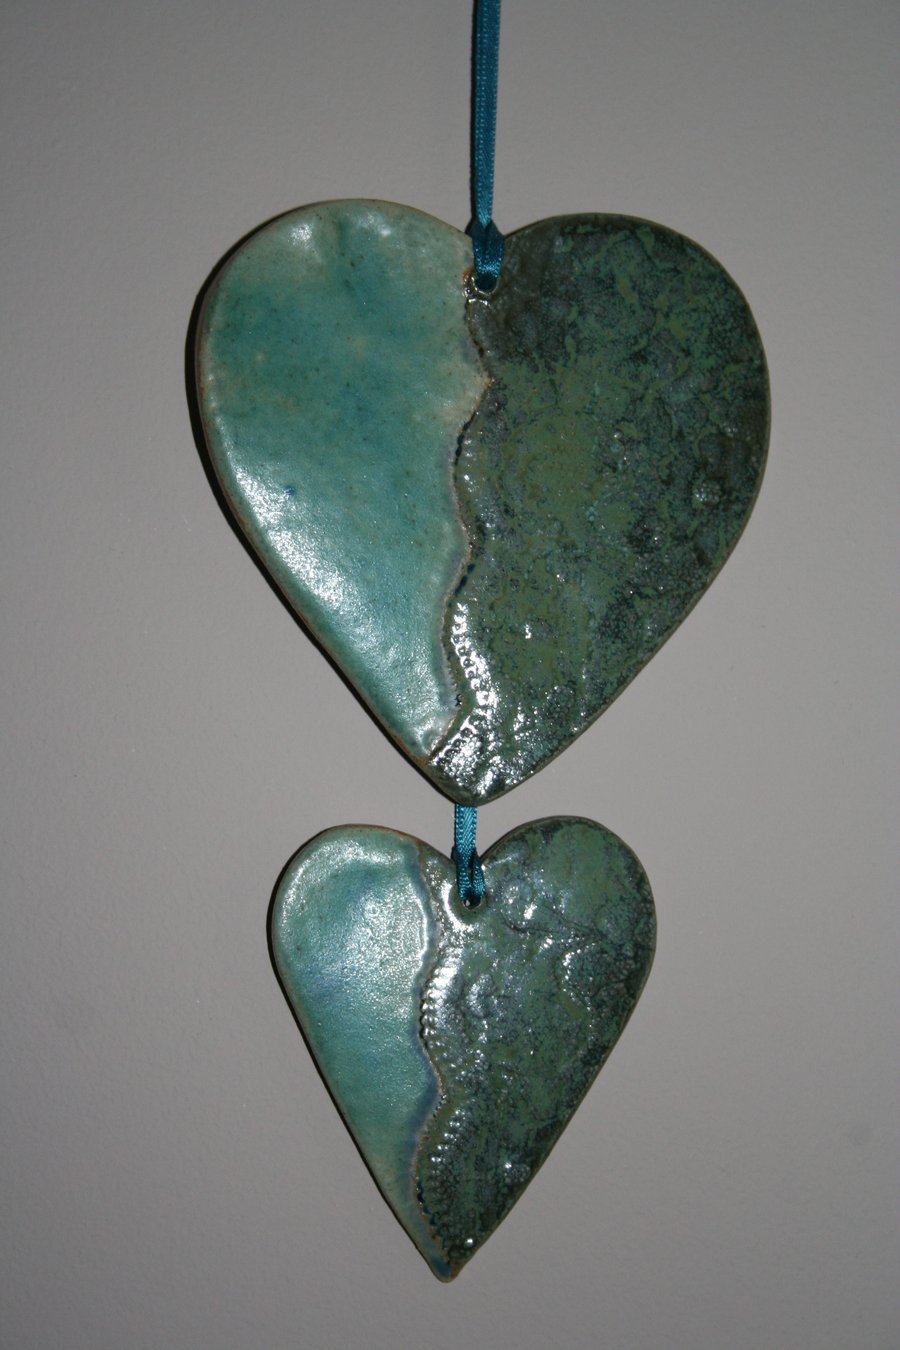 Two heart Ceramic green & turquoise decoration